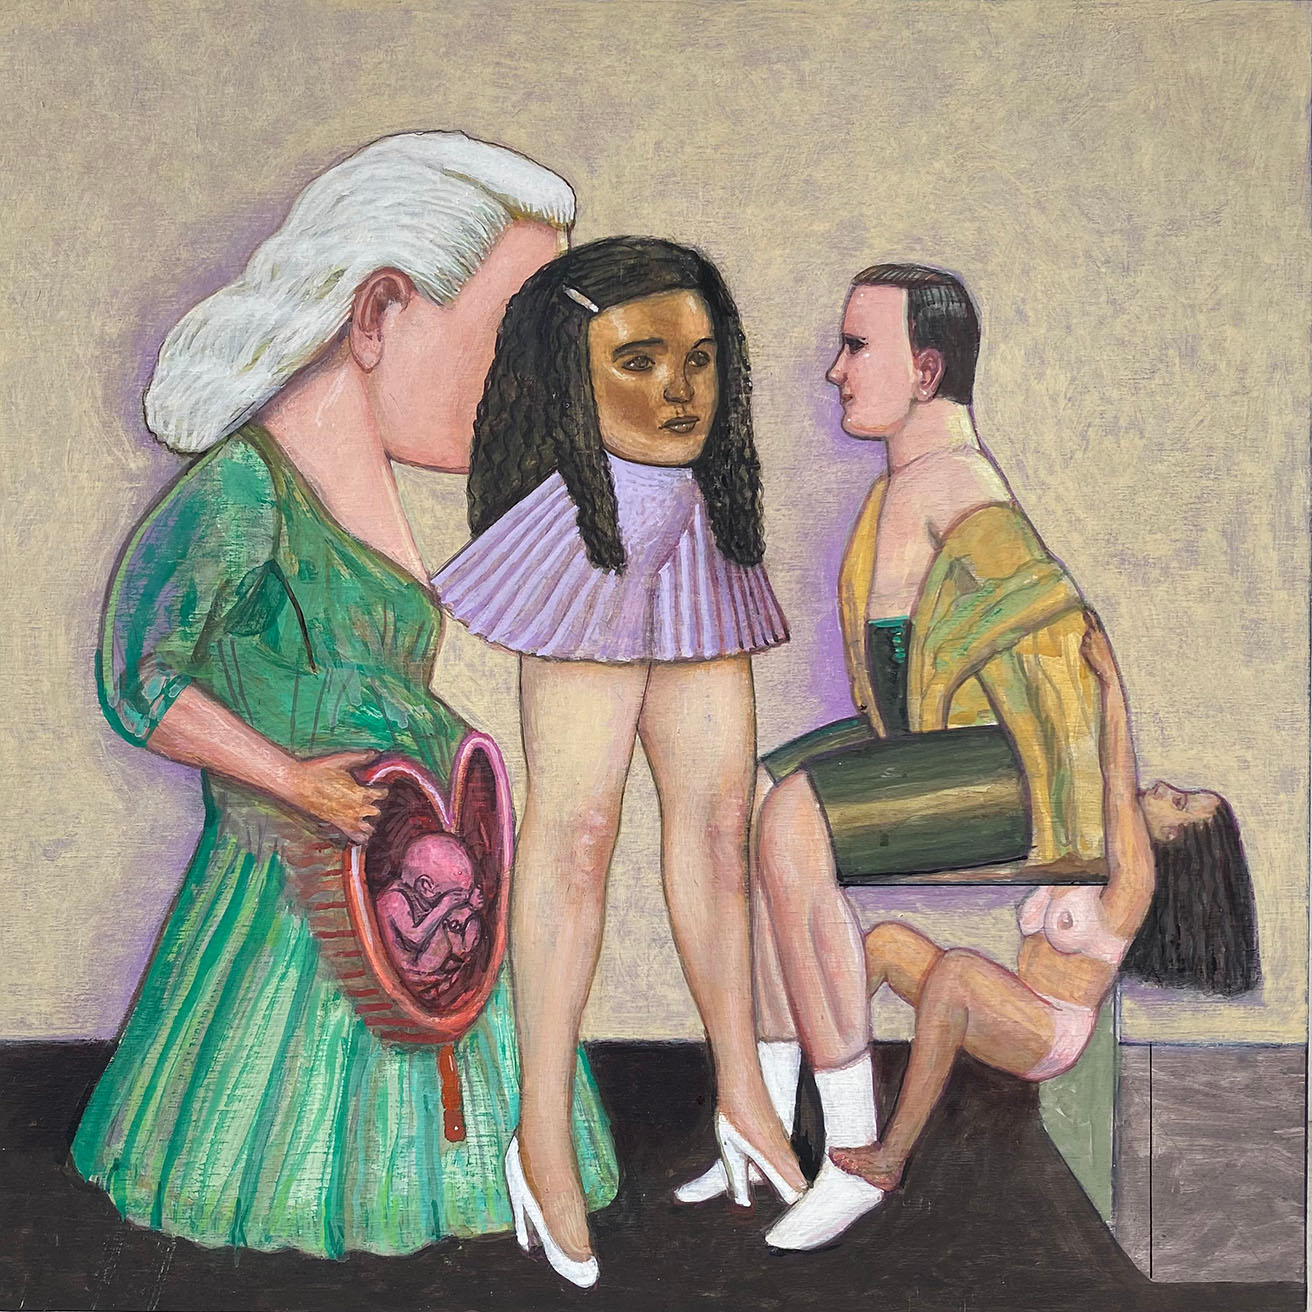 Pat Andrea, What they want, oil and casein paint on canvas, 30 x 30 cm, 2021